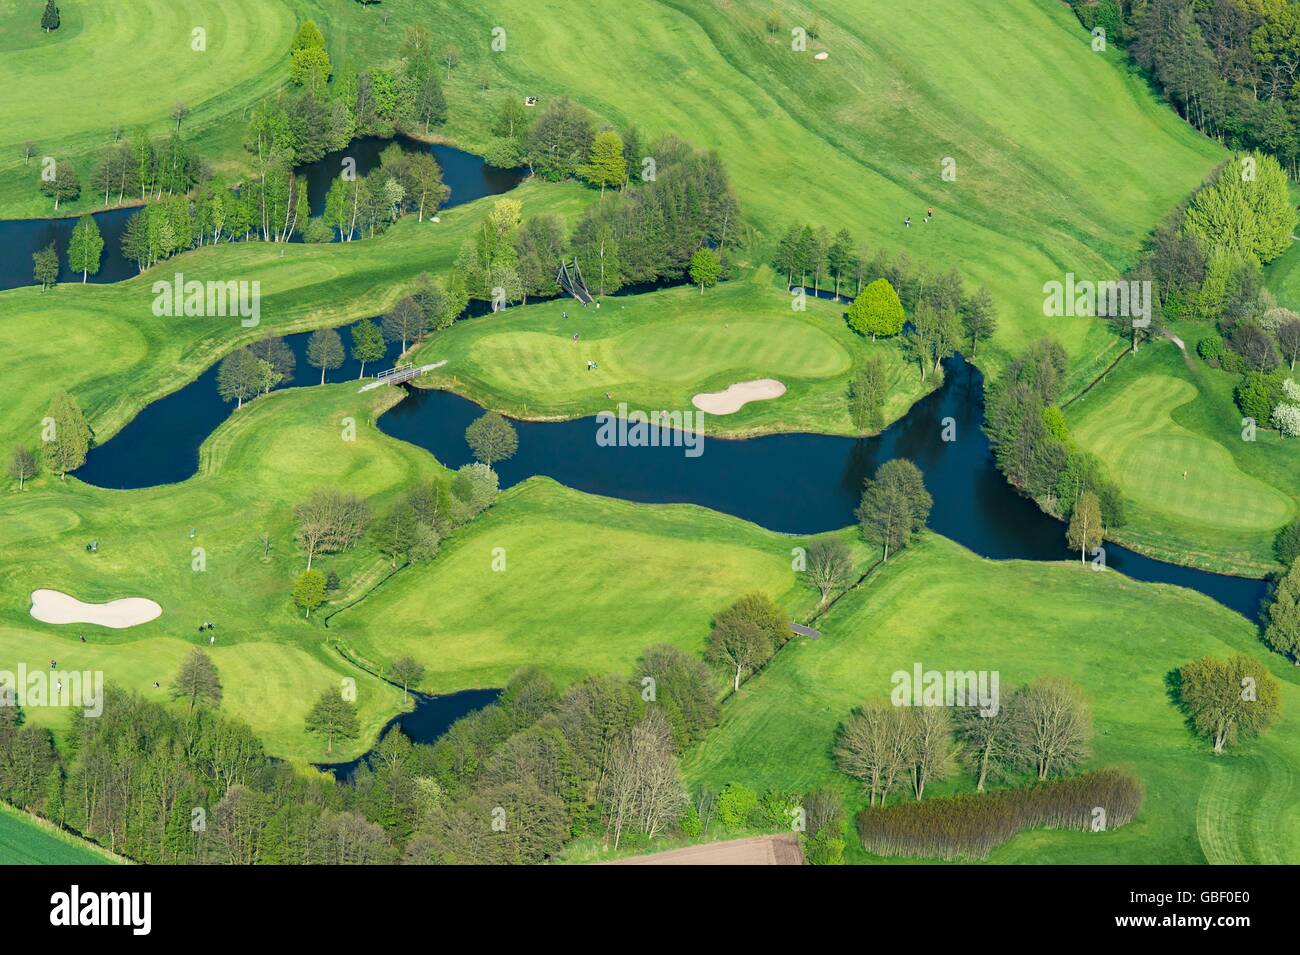 Golfplatz High Resolution Stock Photography and Images - Alamy